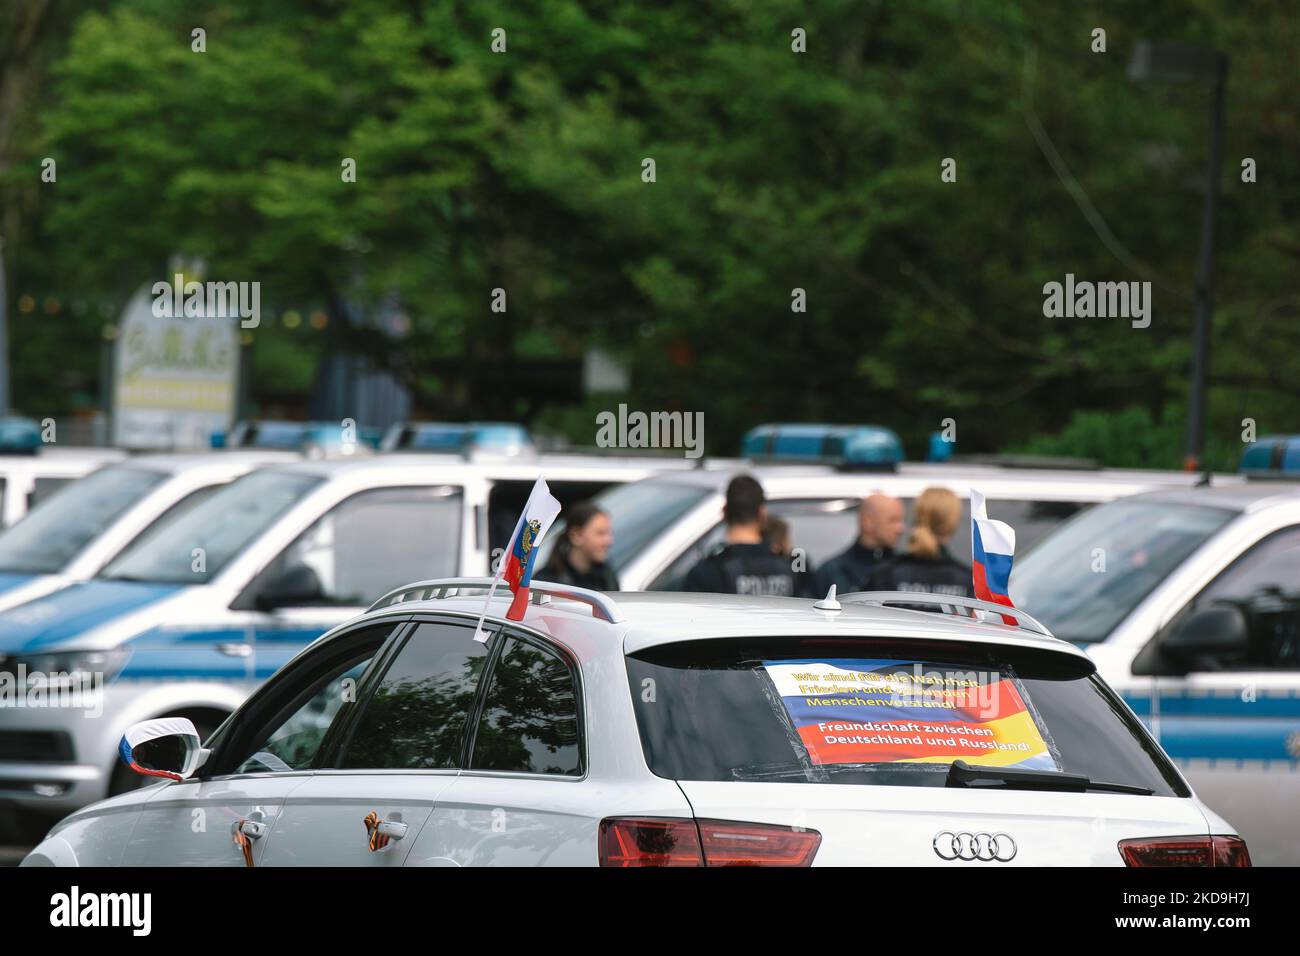 police cars are seen parked before the start of Pro Russian car parade to comenorate the 77th anniversary of V-E Day which marks the end of World War II in Europe in 1945 in Cologne, Germany on May 8, 2022 (Photo by Ying Tang/NurPhoto) Stock Photo